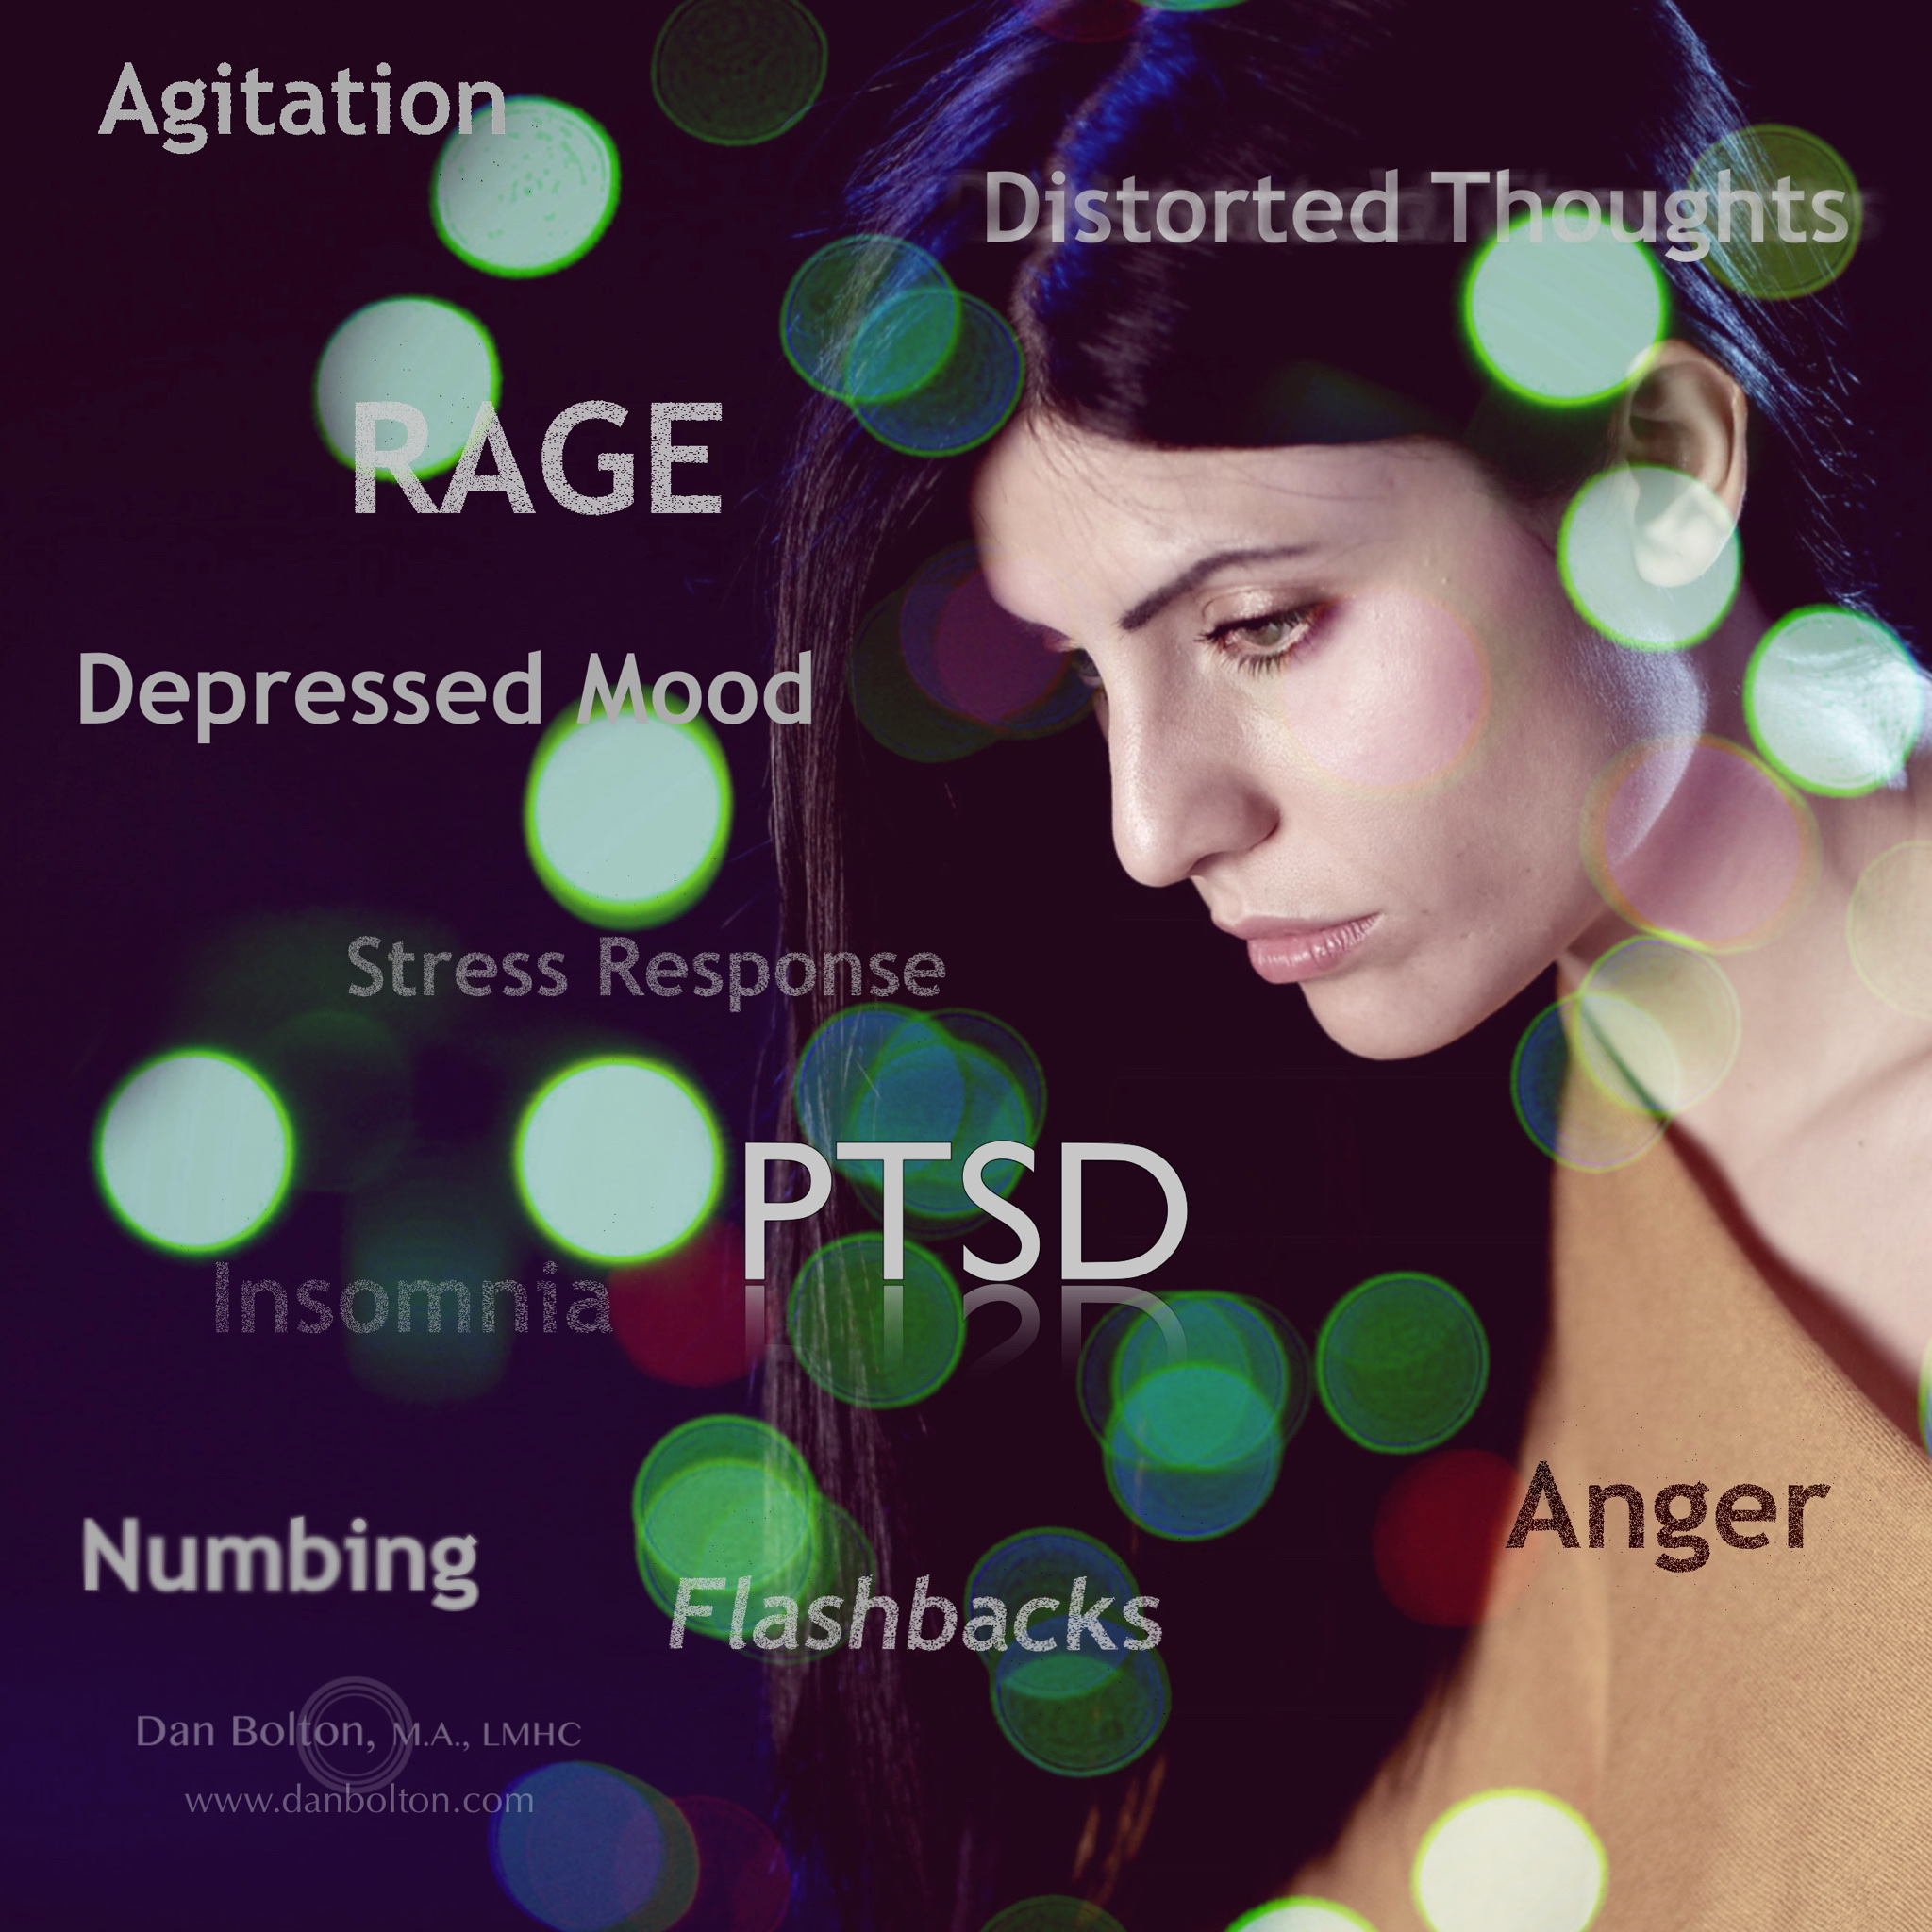 Woman suffering from PTSD